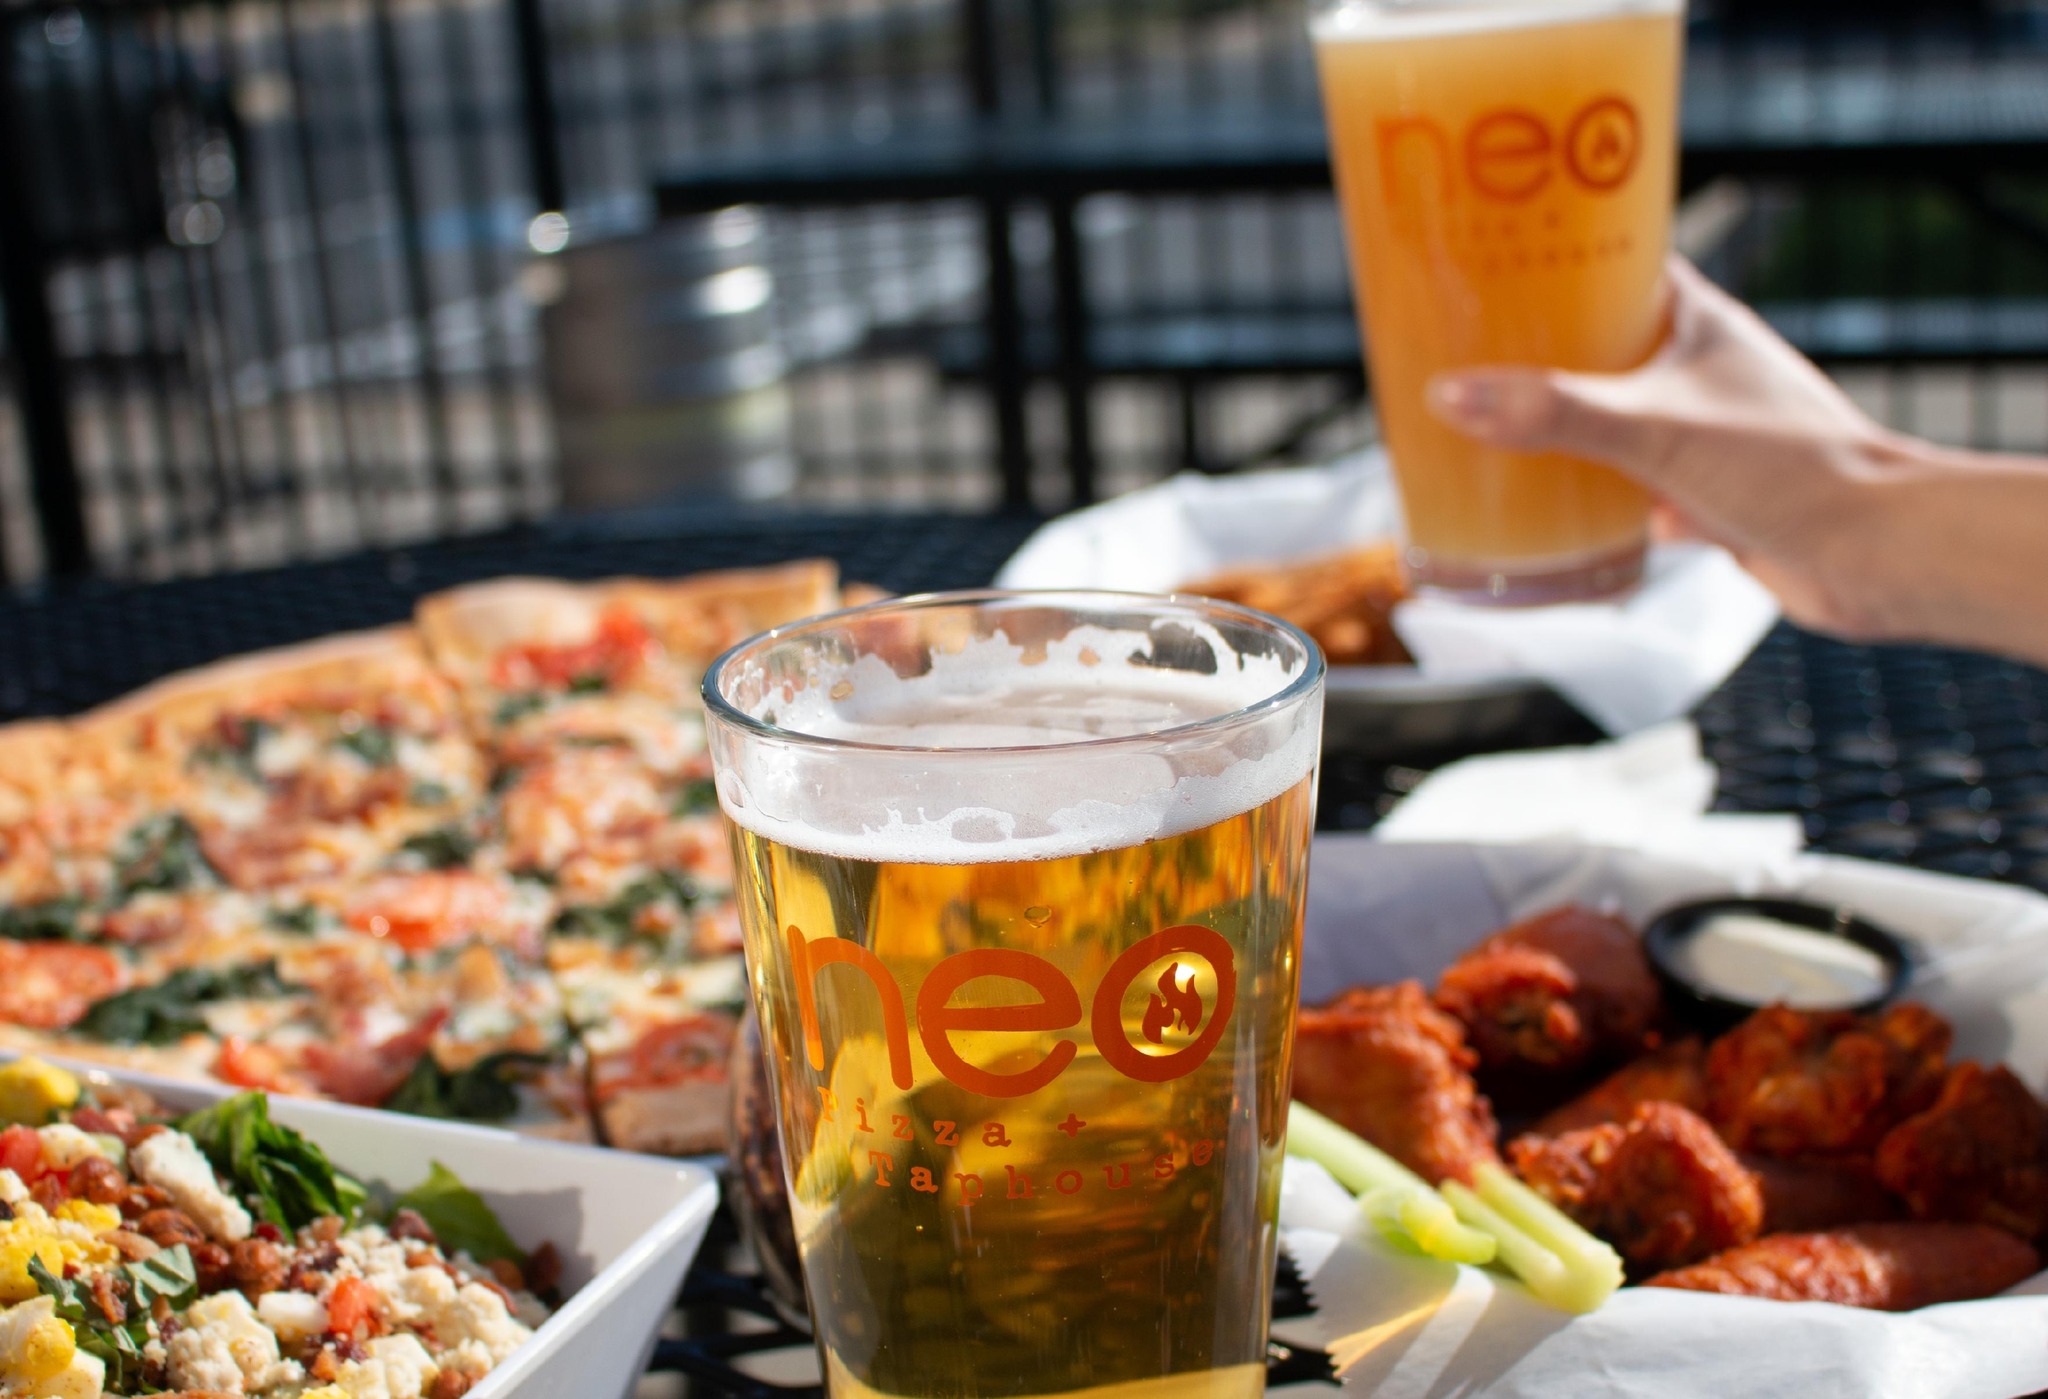 Several plates of food, including wings and pizza, with two glasses of beer